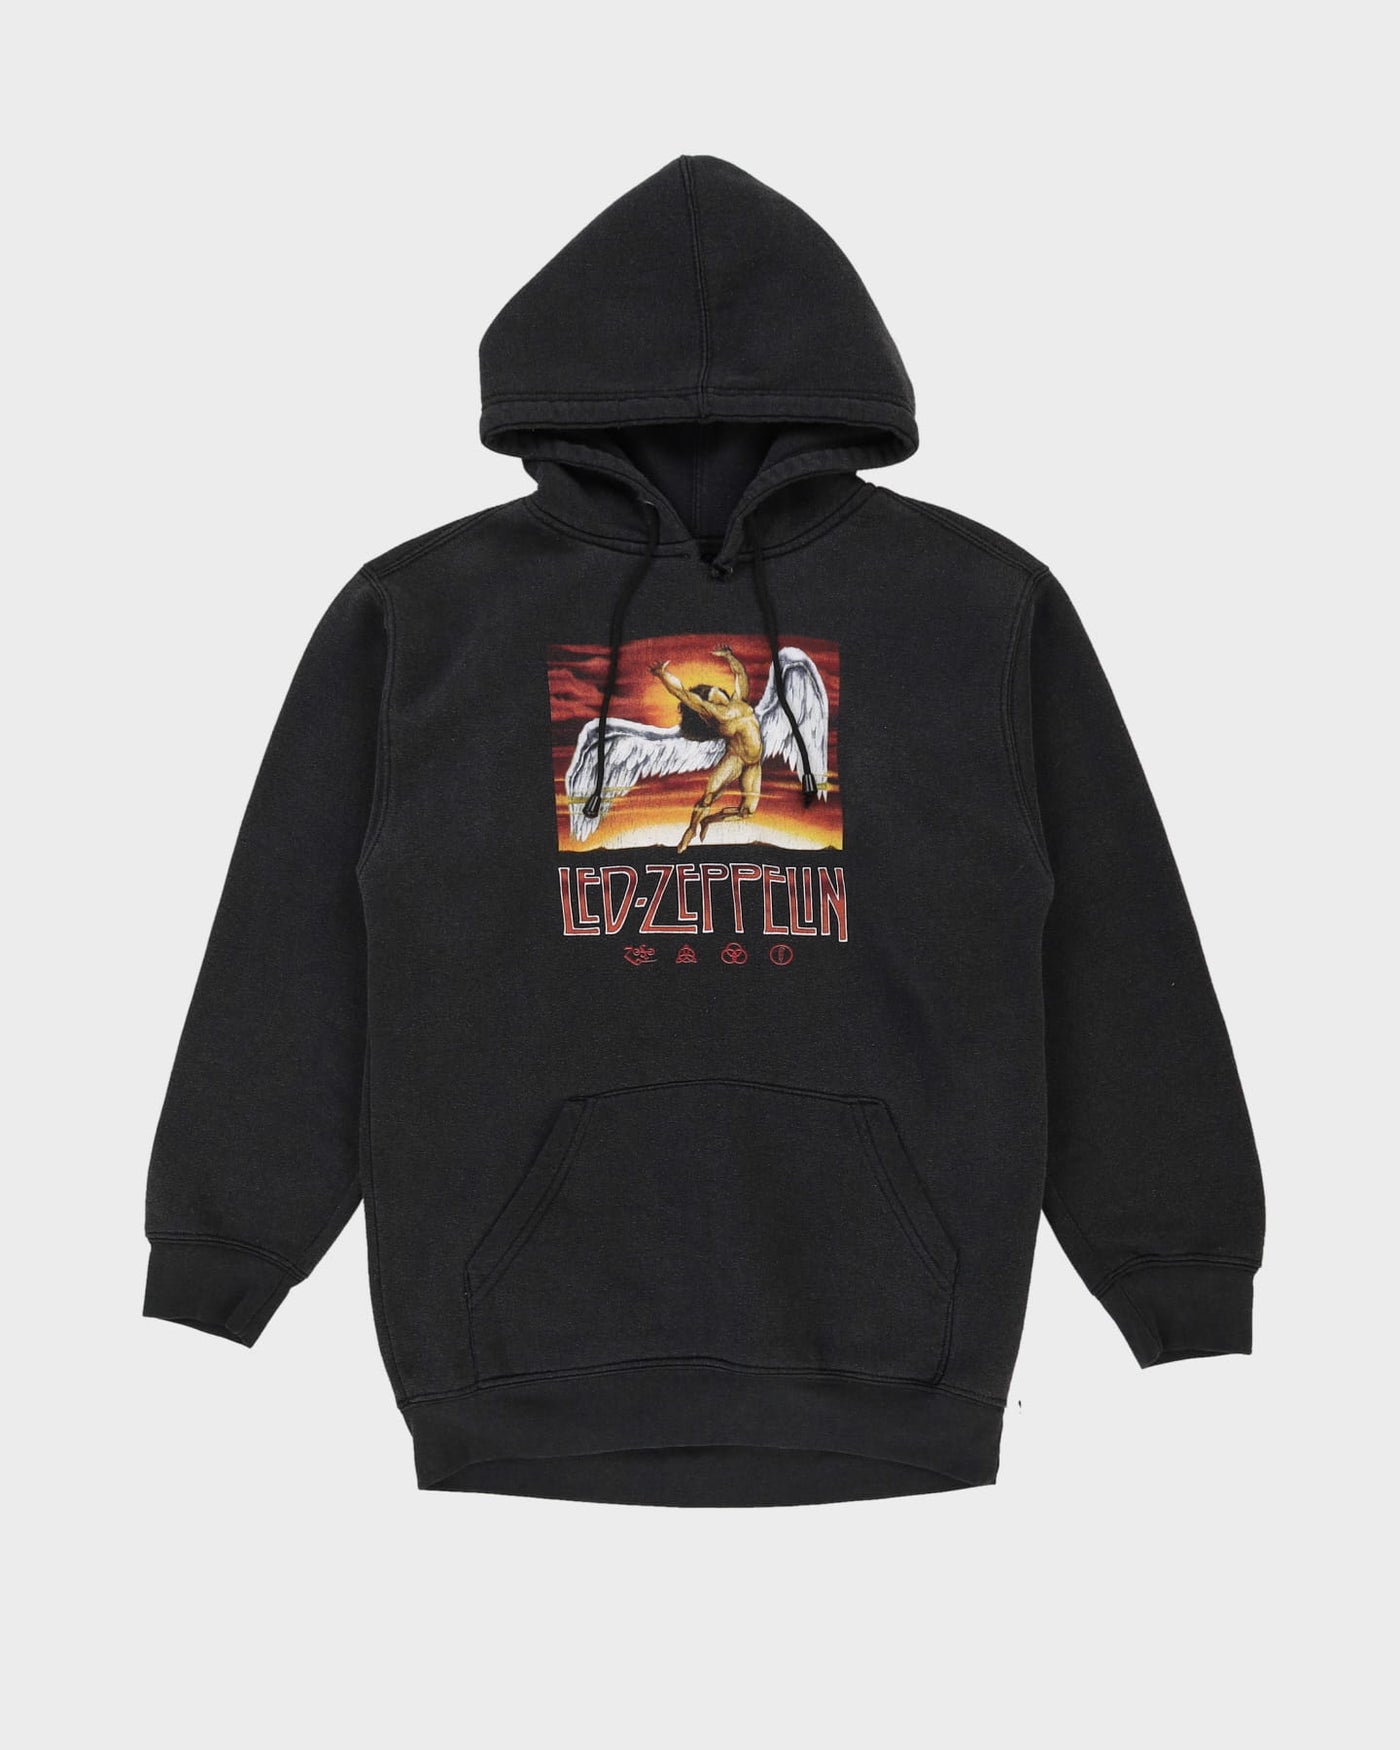 00s Led Zeppelin Faded Black Band Hoodie - M